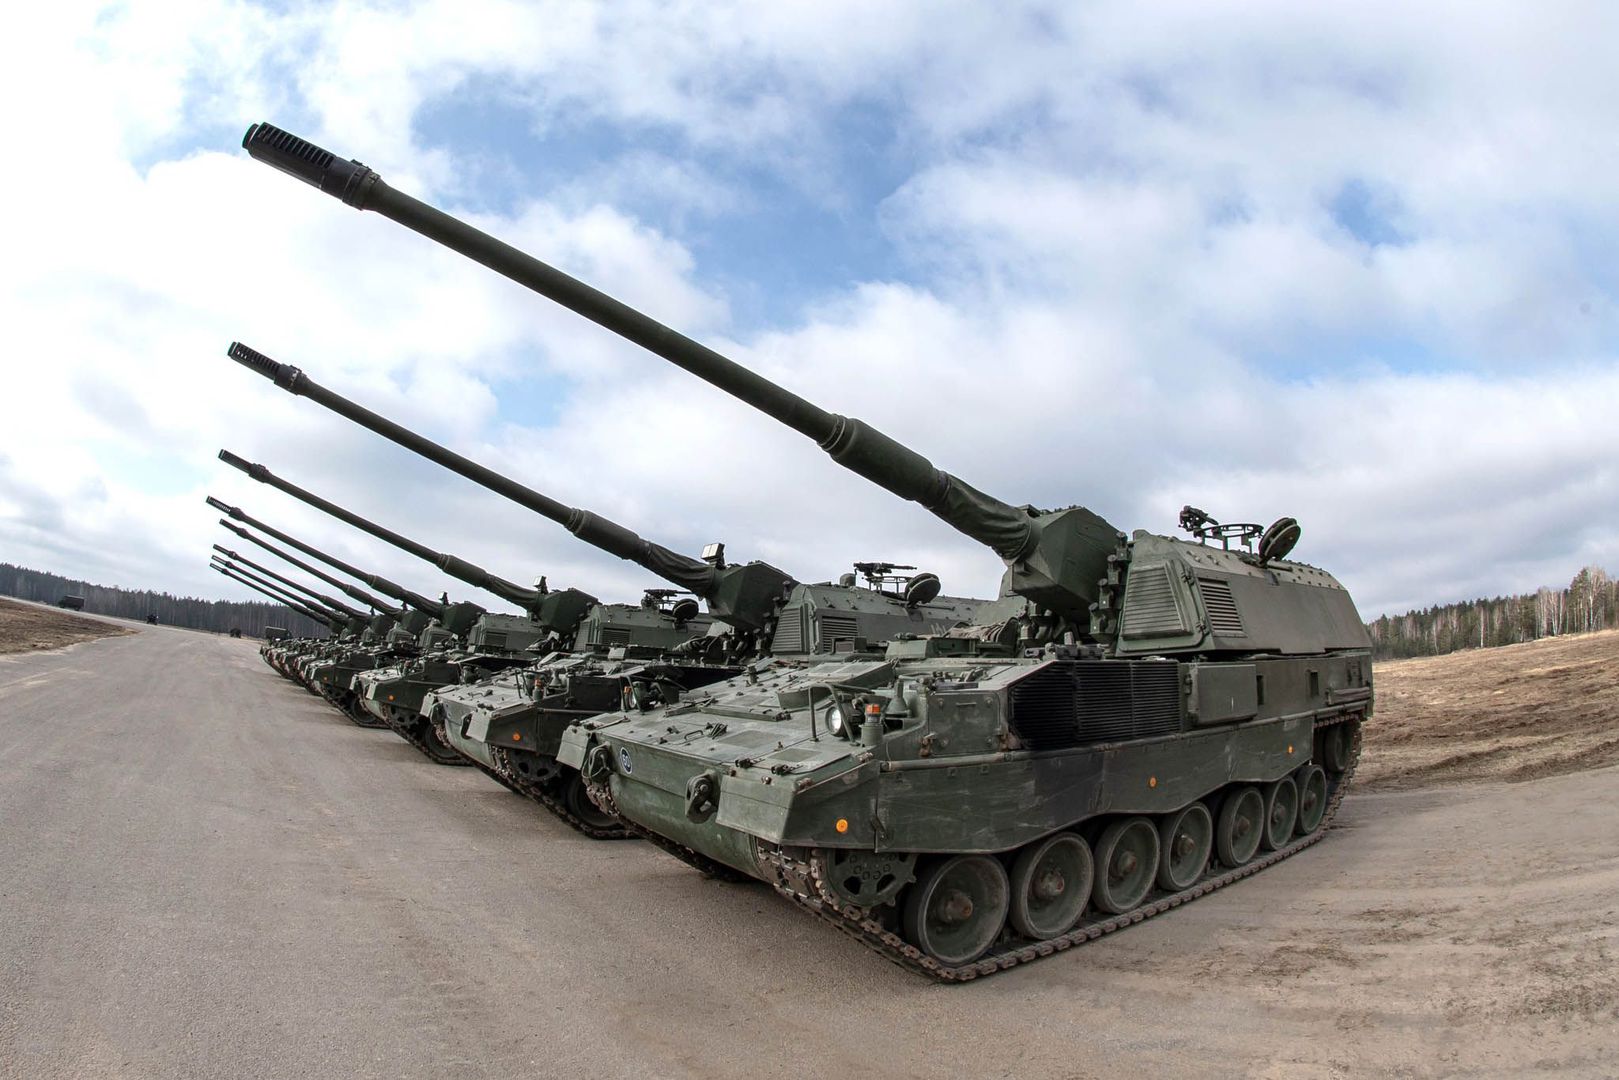 PzH 2000 Self-propelled Howitzer